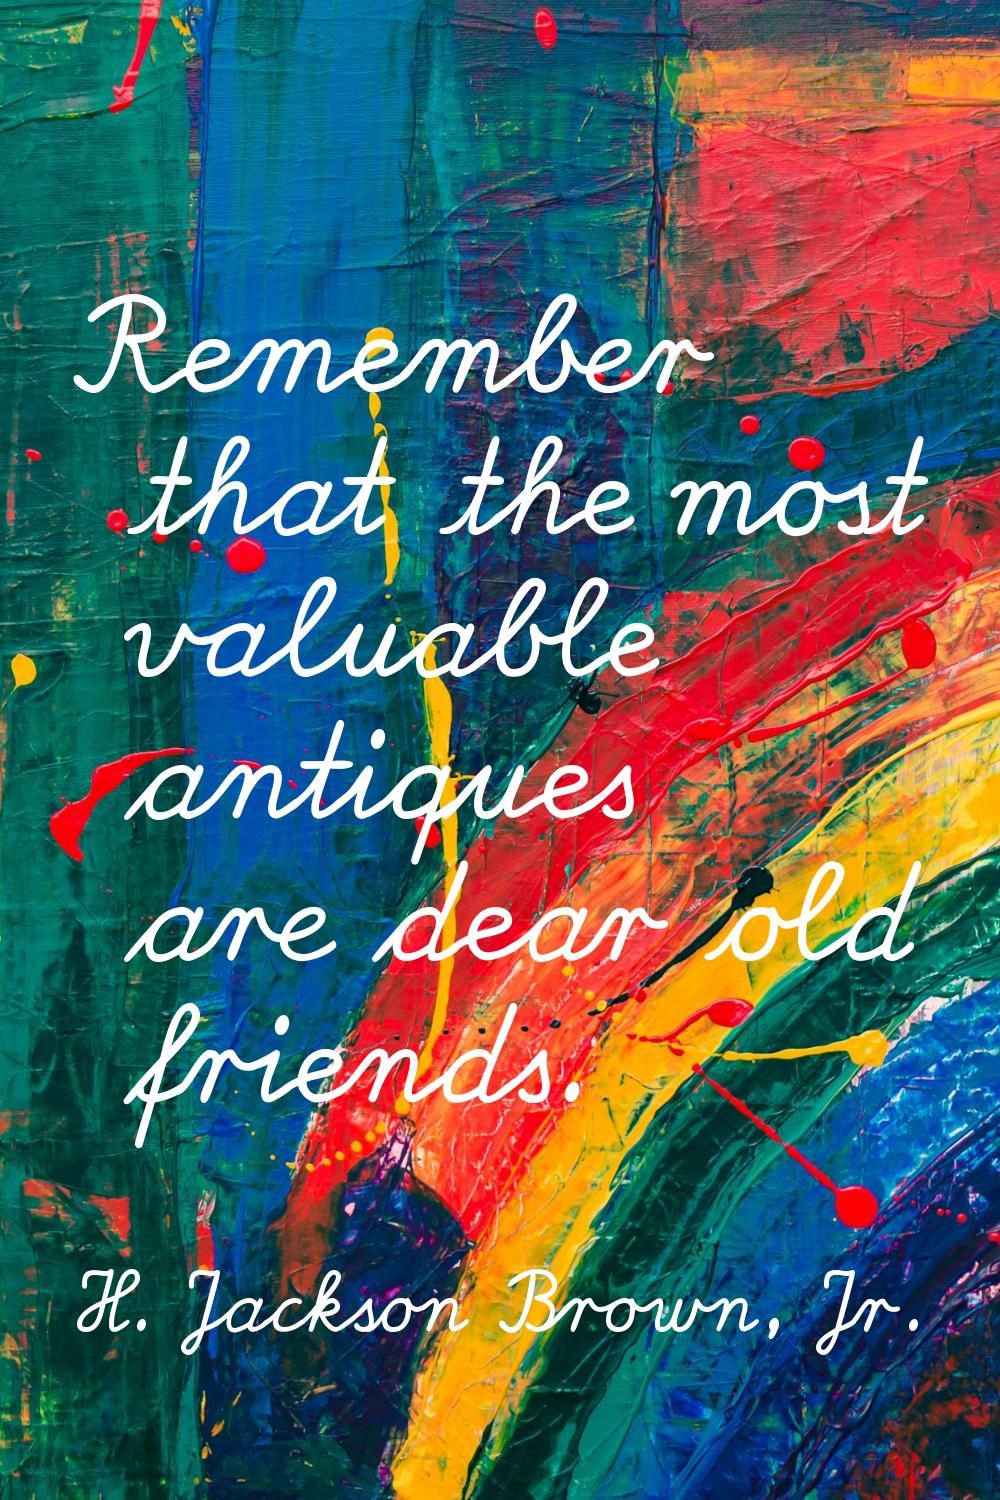 Remember that the most valuable antiques are dear old friends.